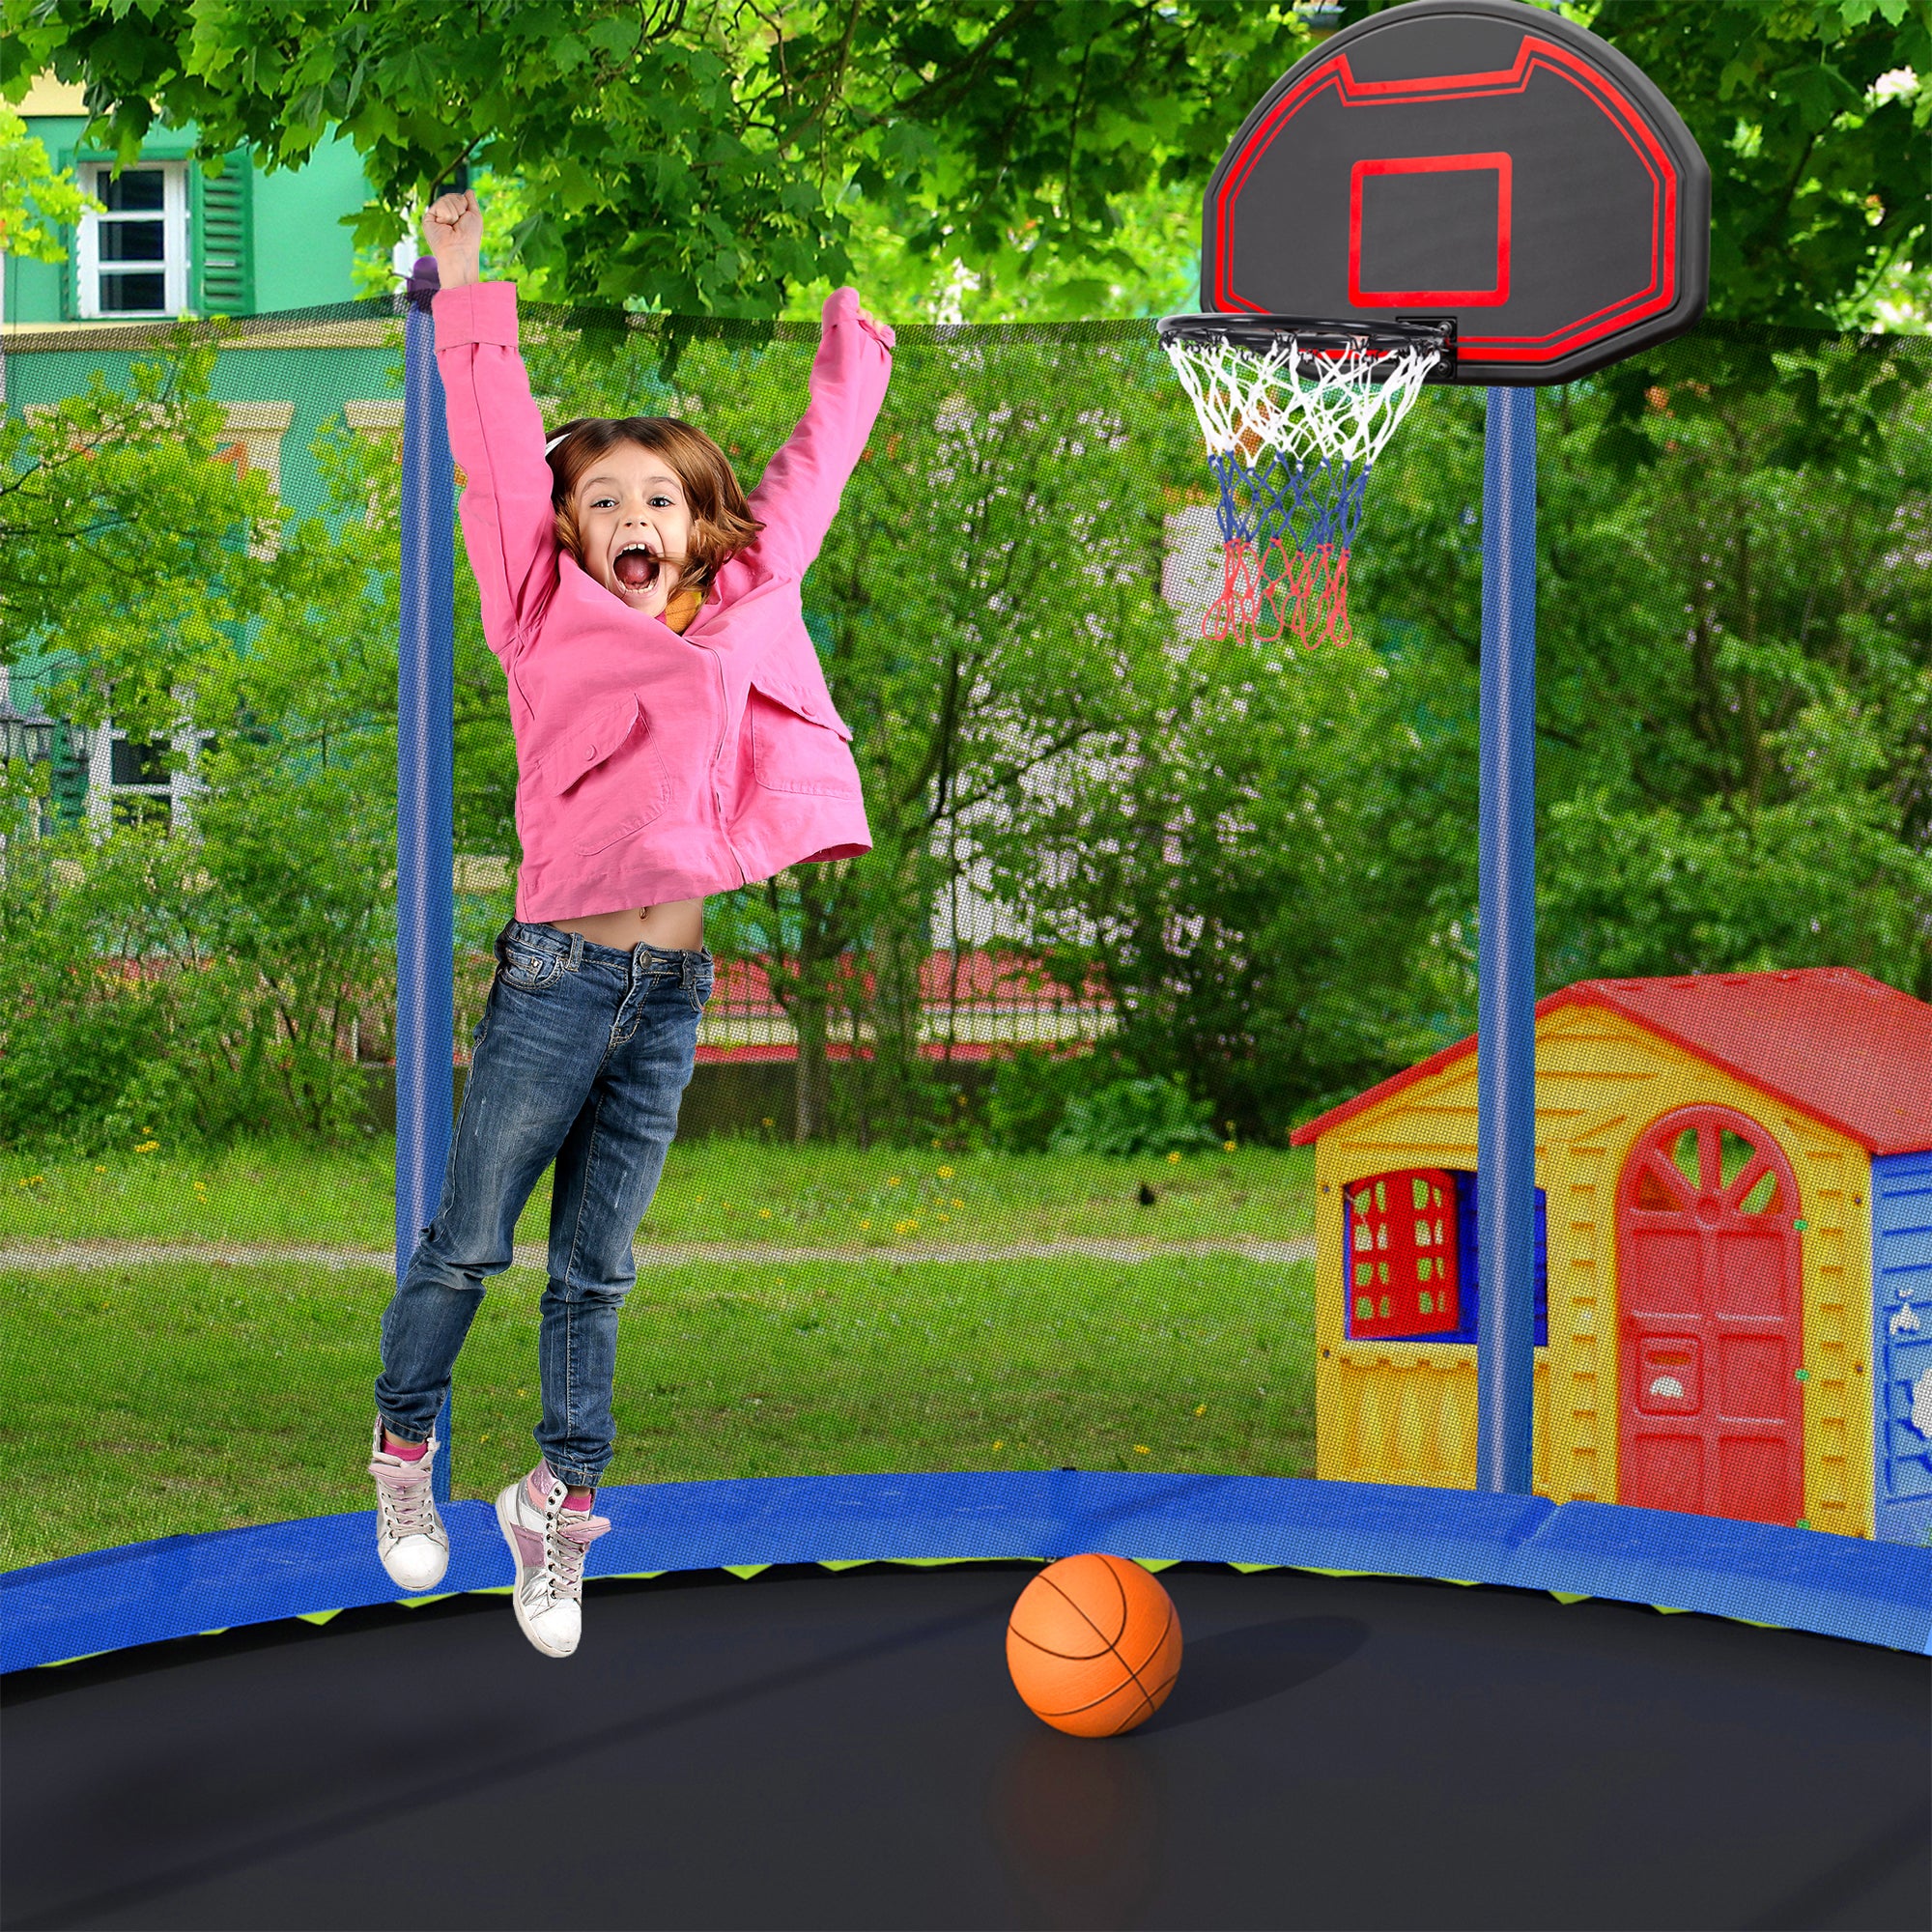 15FT Trampoline with Basketball Hoop Inflator and blue-stainless steel